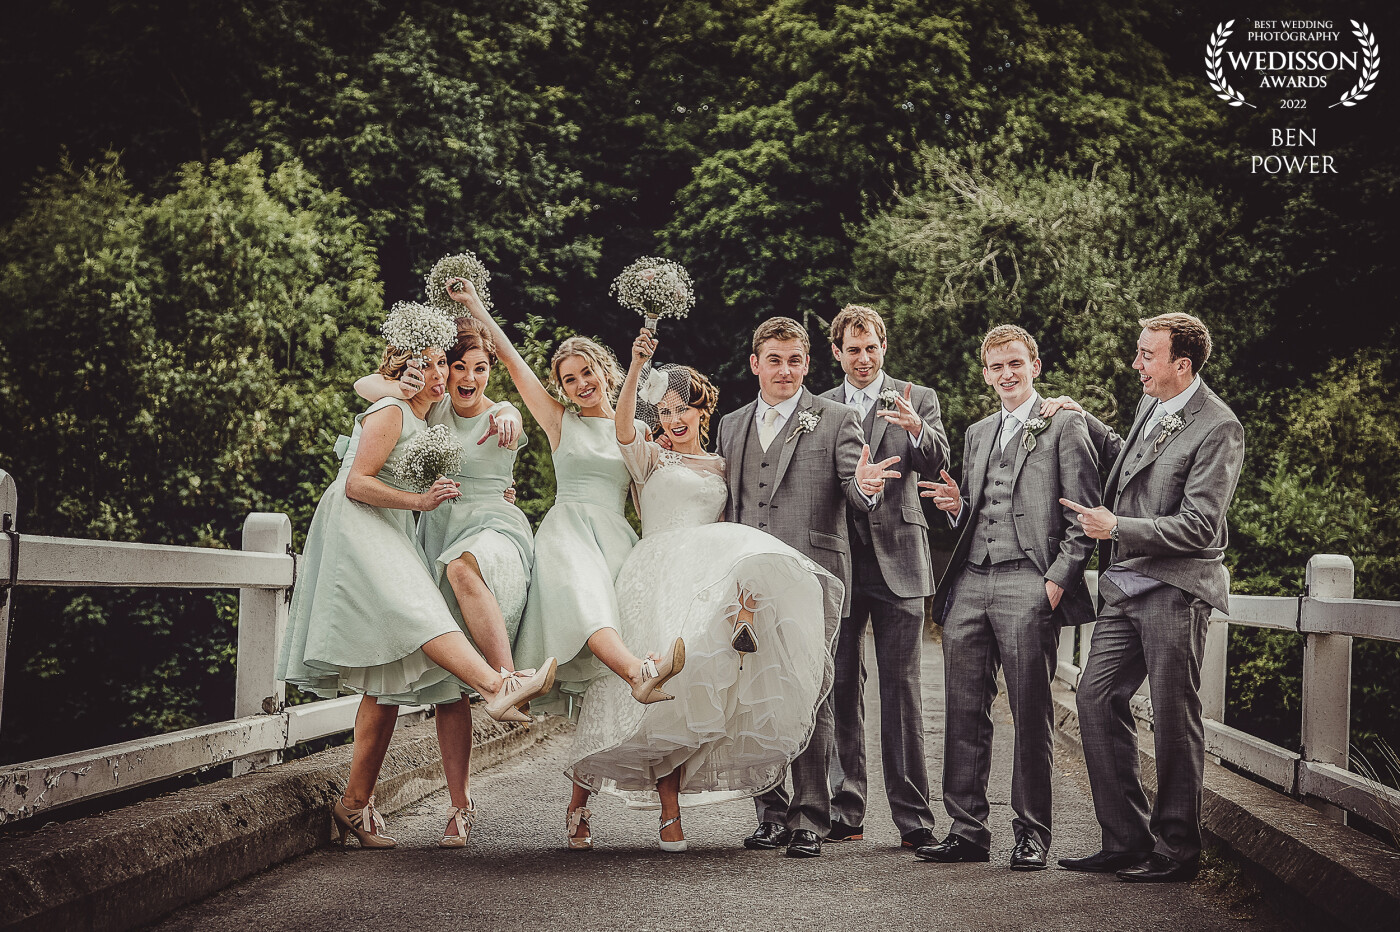 Lots of fun with this bridal party,taken in the grounds of Mount Juliet estate in Kilkenny-Ireland. It was taken just before dinner call when i find i often get the best group shots as they know the formals are done and its time to PARTY!!